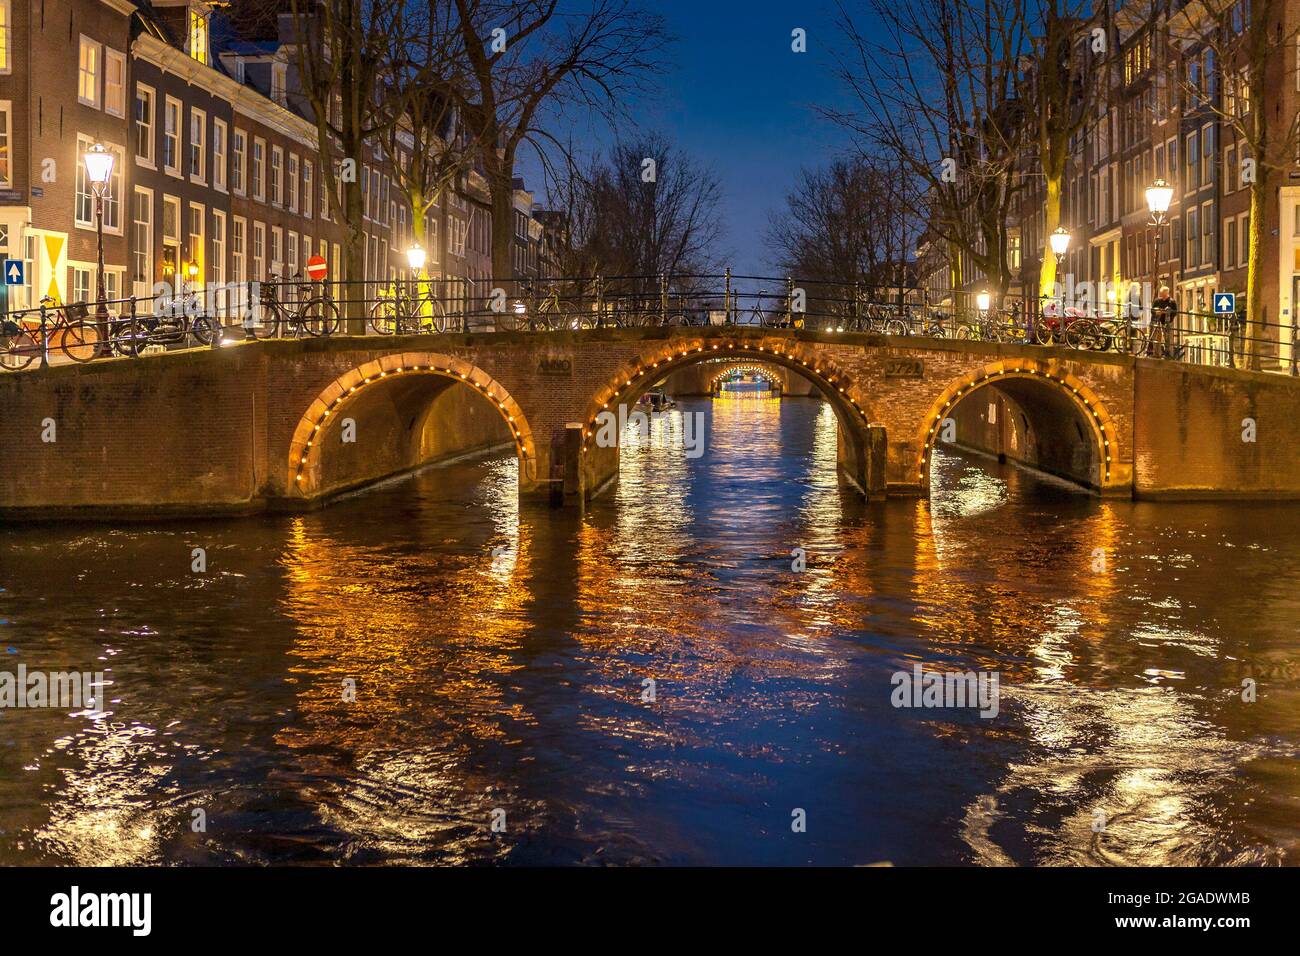 Bridge with arches, illuminated at night, Herengracht and Leidsegracht canals, Amsterdam Stock Photo